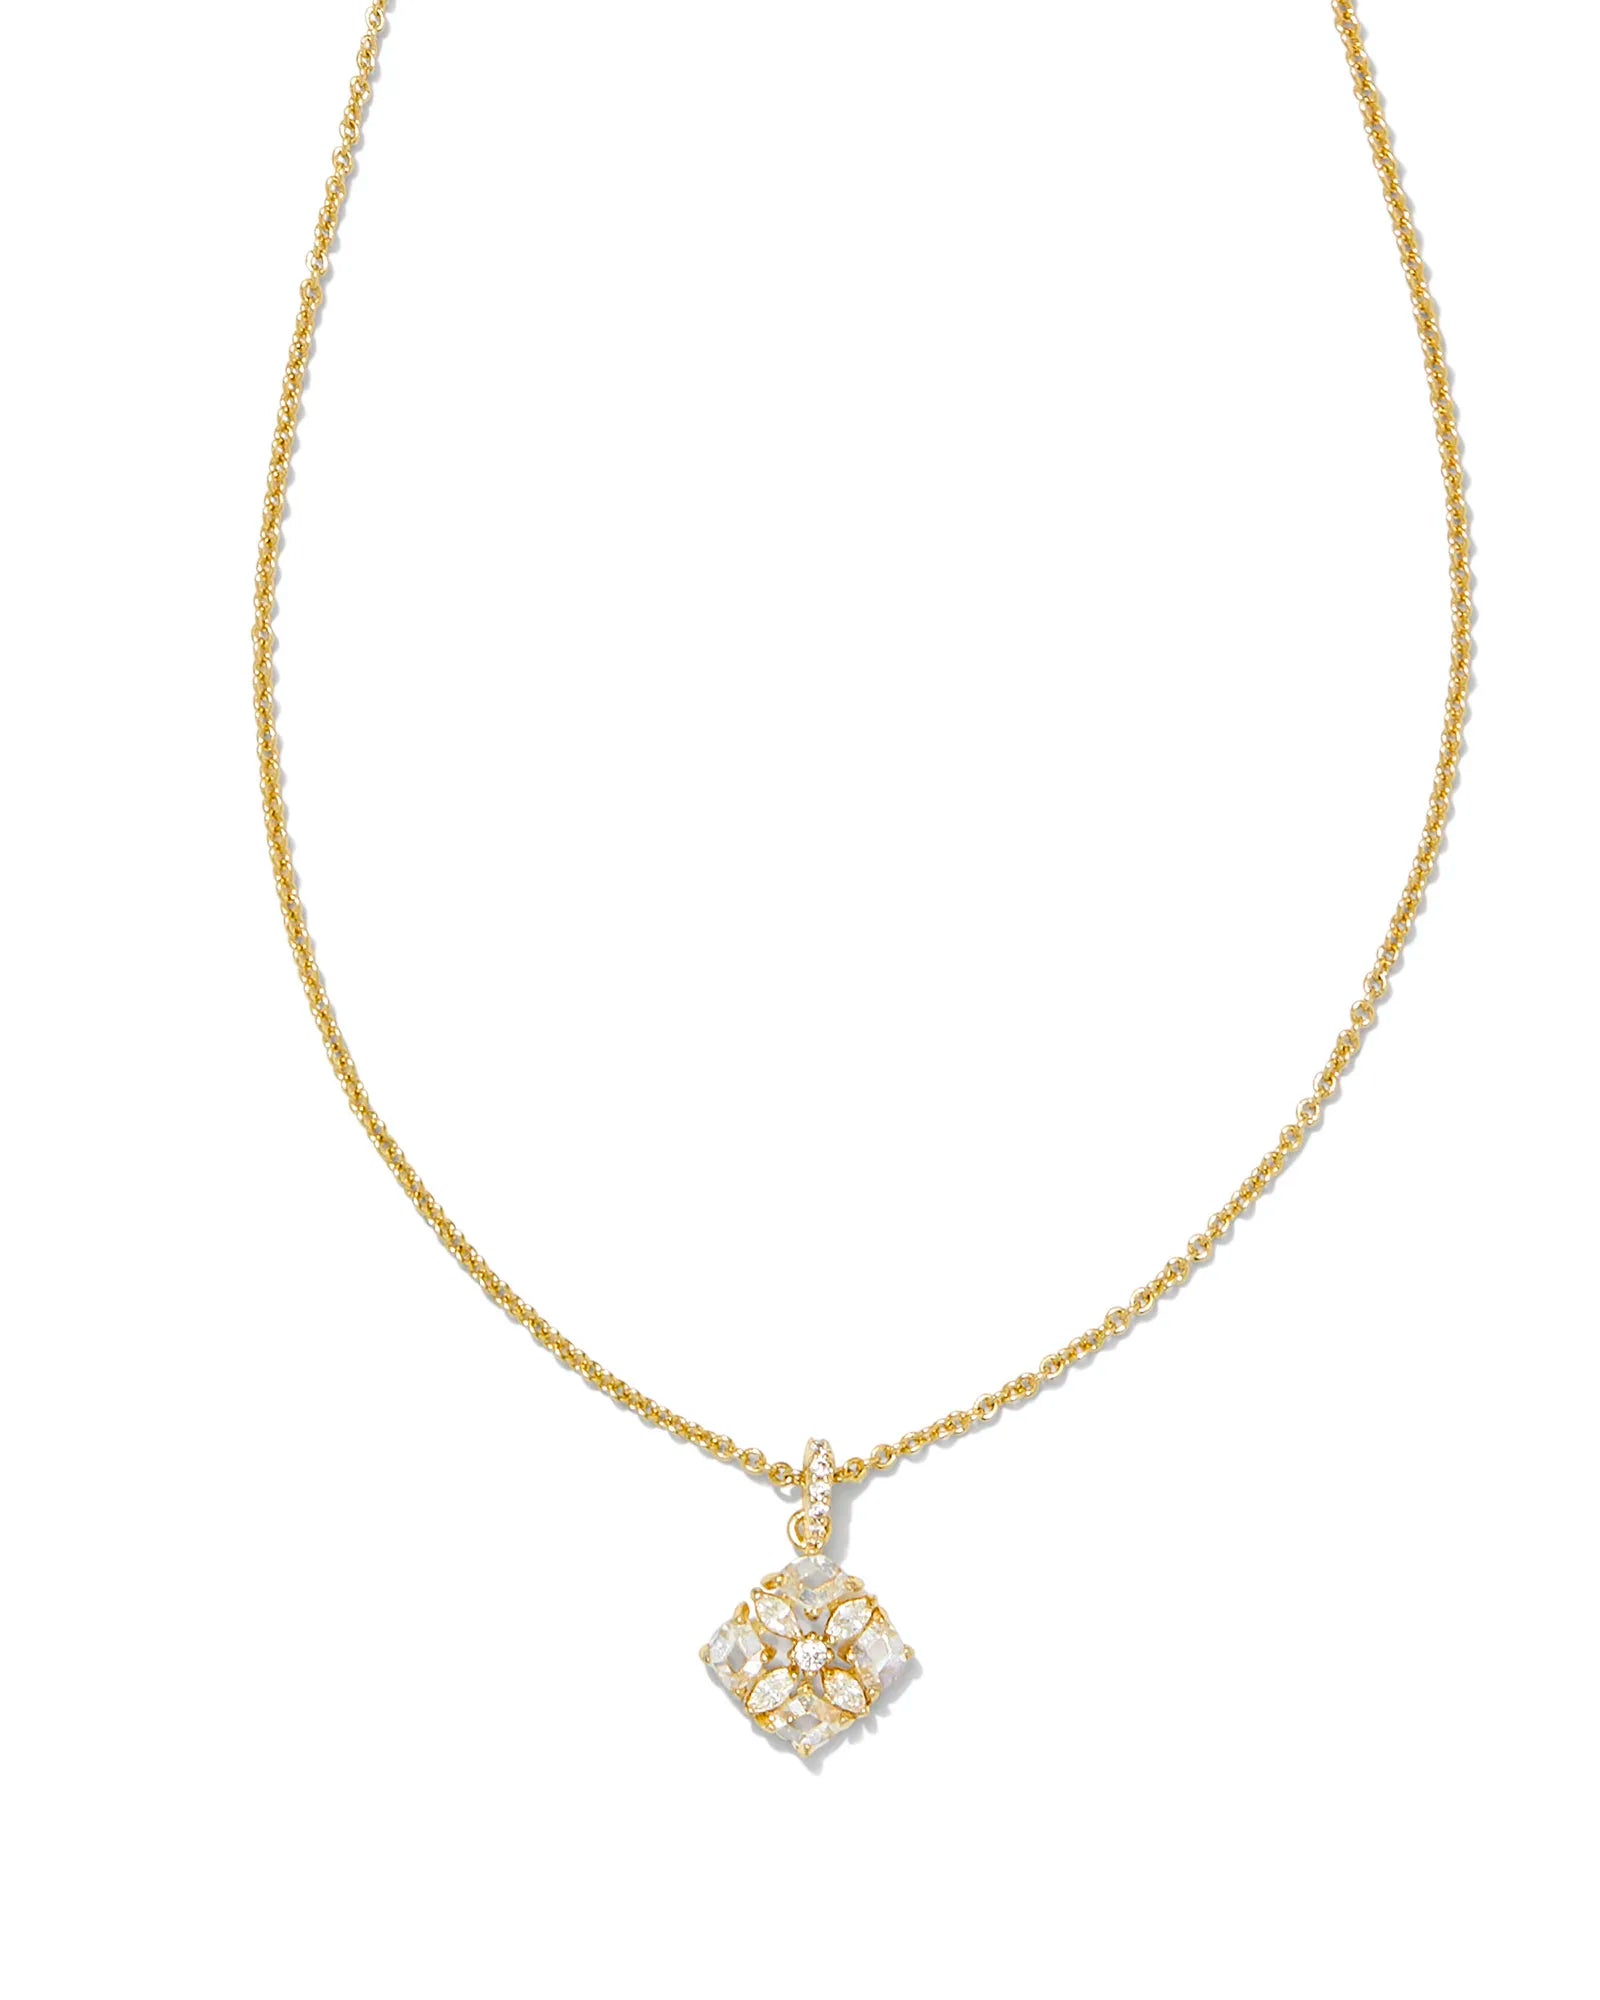 Kendra Scott Dira Crystal Huggie Short Pendant Necklace Gold White Crystal-Necklaces-Kendra Scott-N00469GLD-The Twisted Chandelier